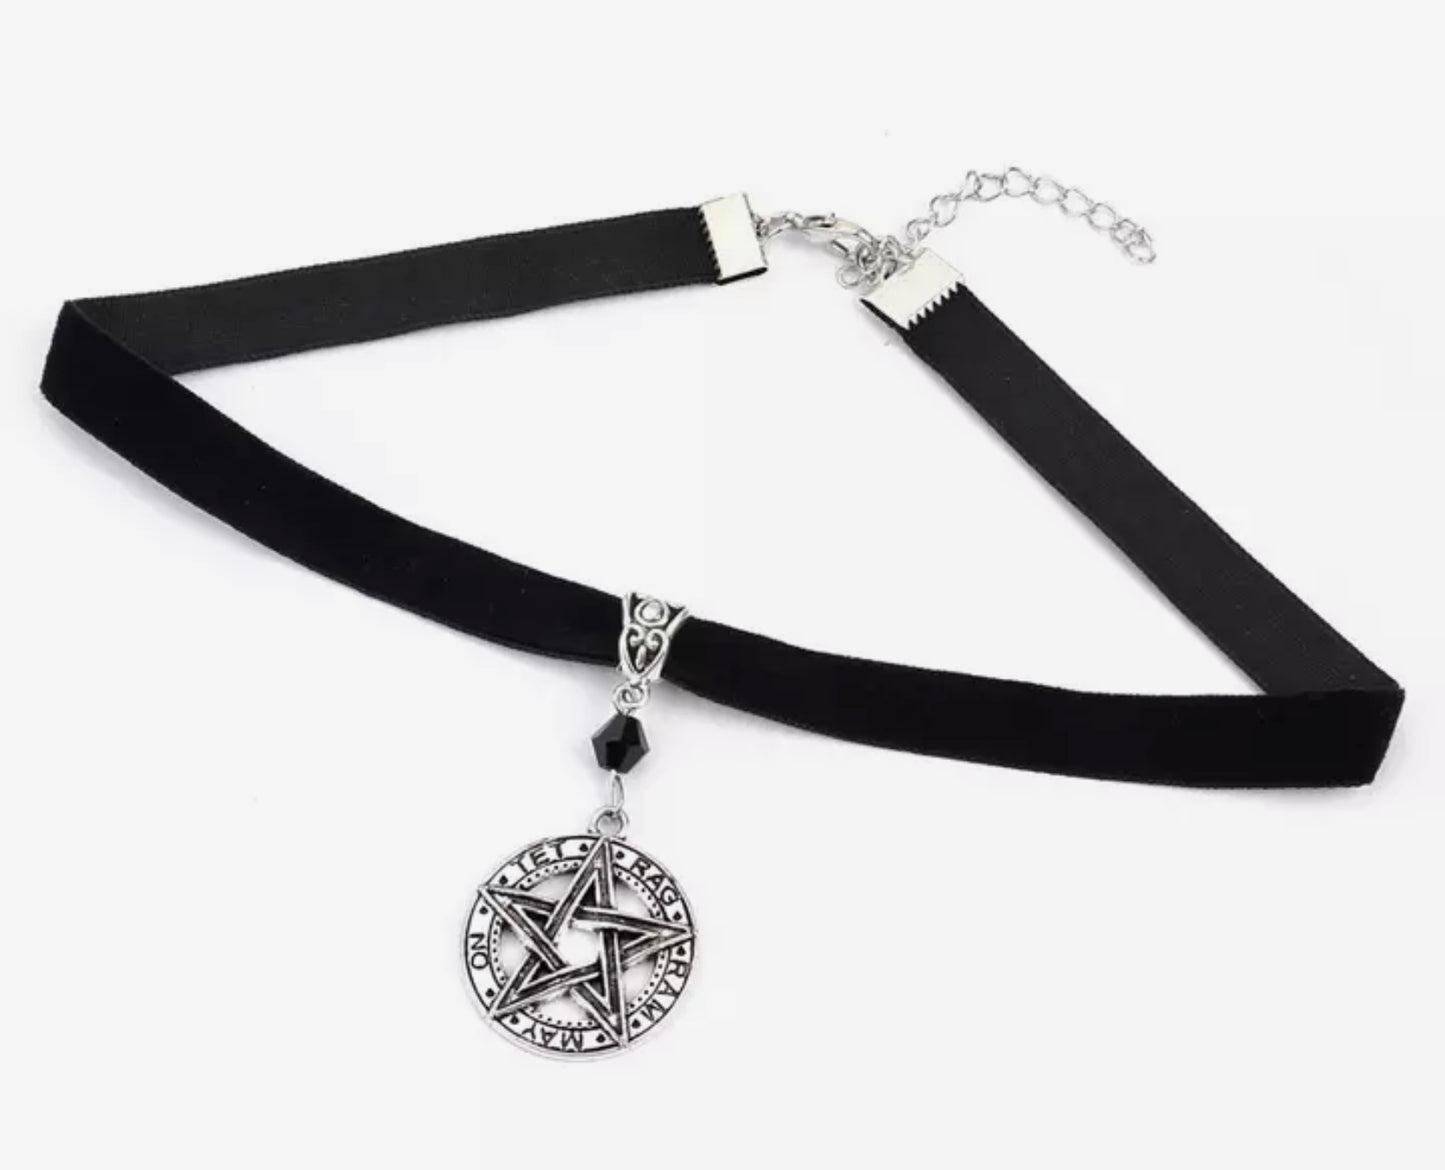 Gothic Dark Pentagram Pendant Chokers Necklace Star Witchy Velvet Necklaces Pagan Wicca For Alternative Girl Mystical Jewelry